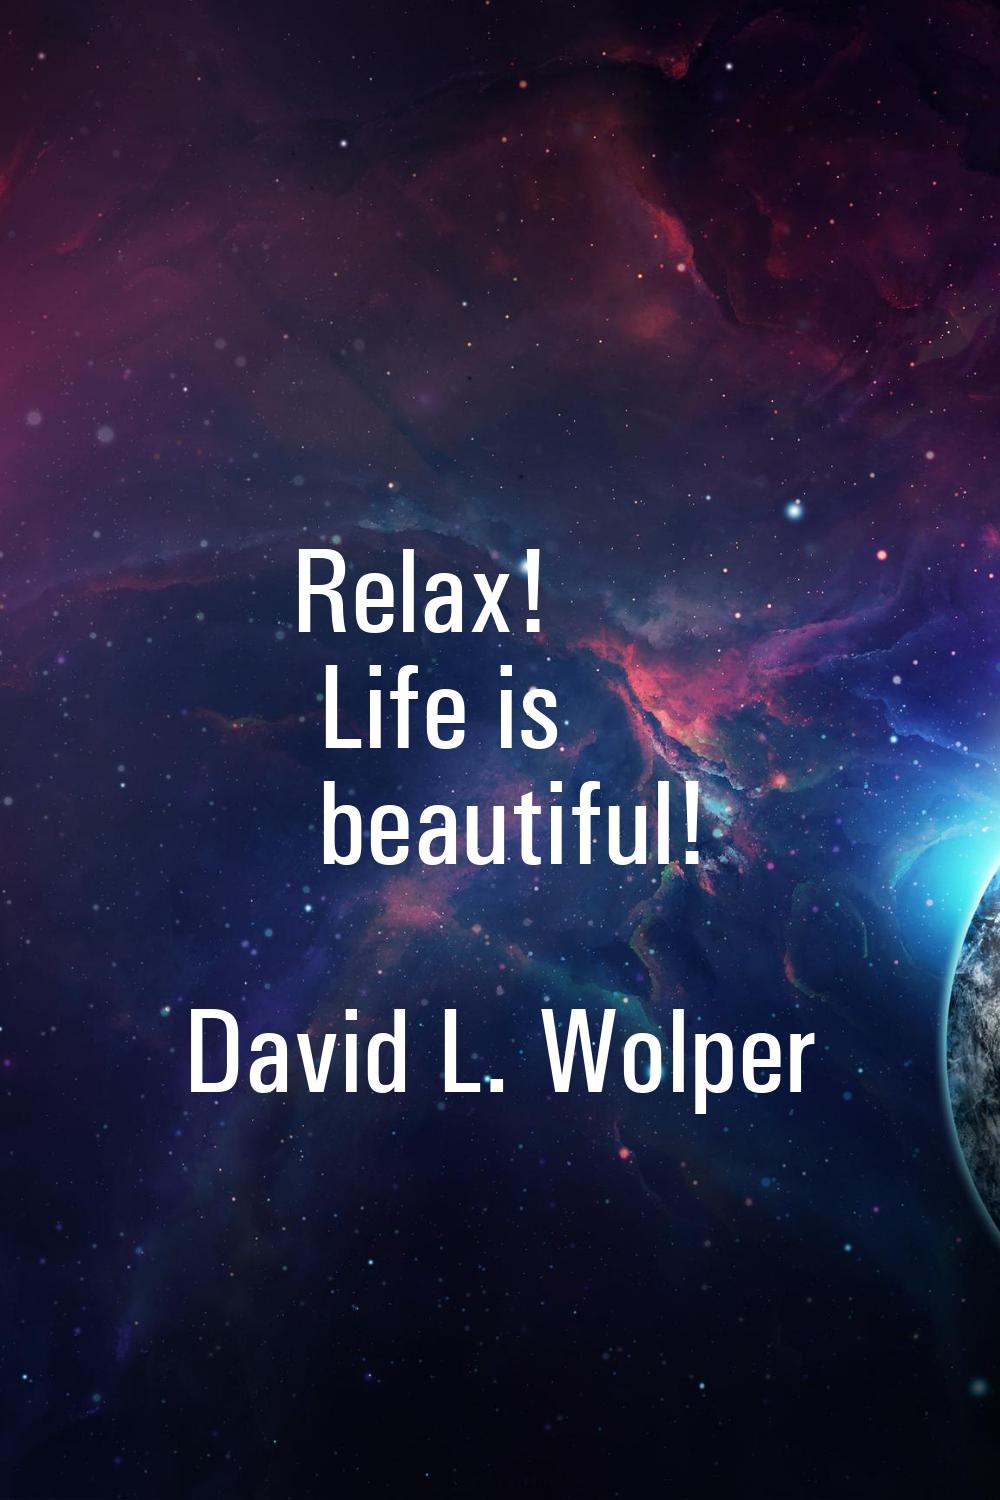 Relax! Life is beautiful!